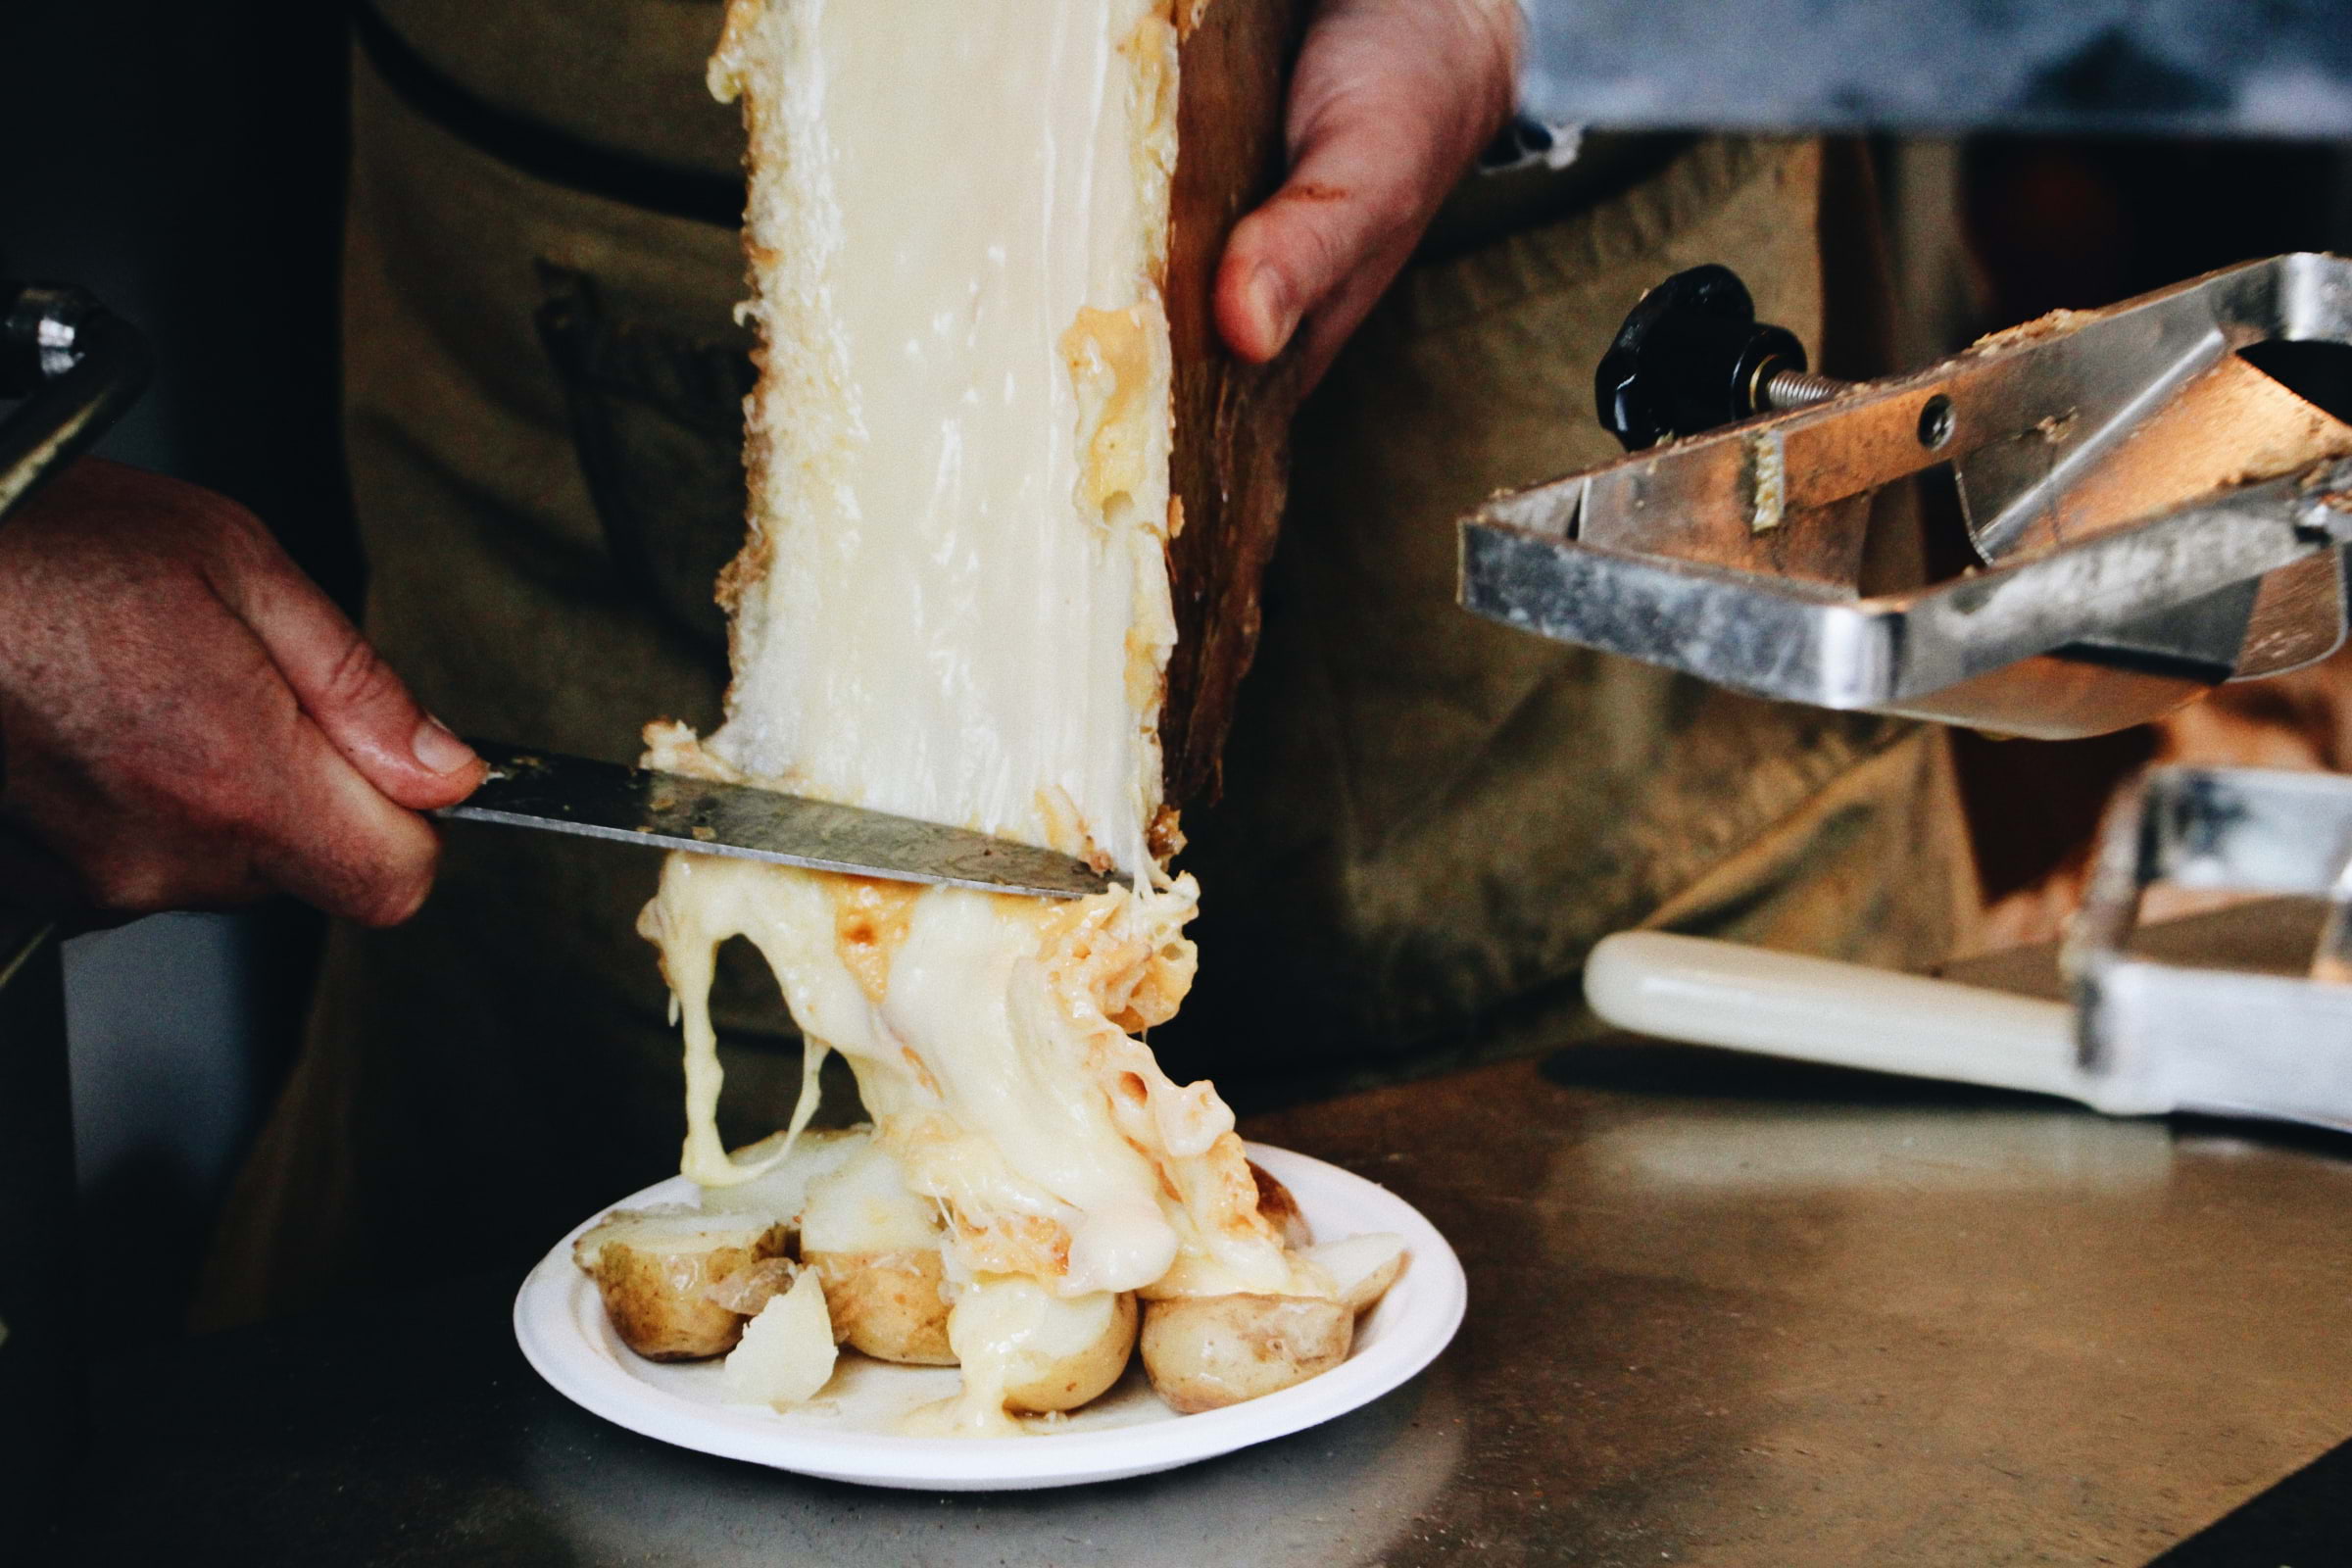 The best cheese restaurants and cheese bars in London